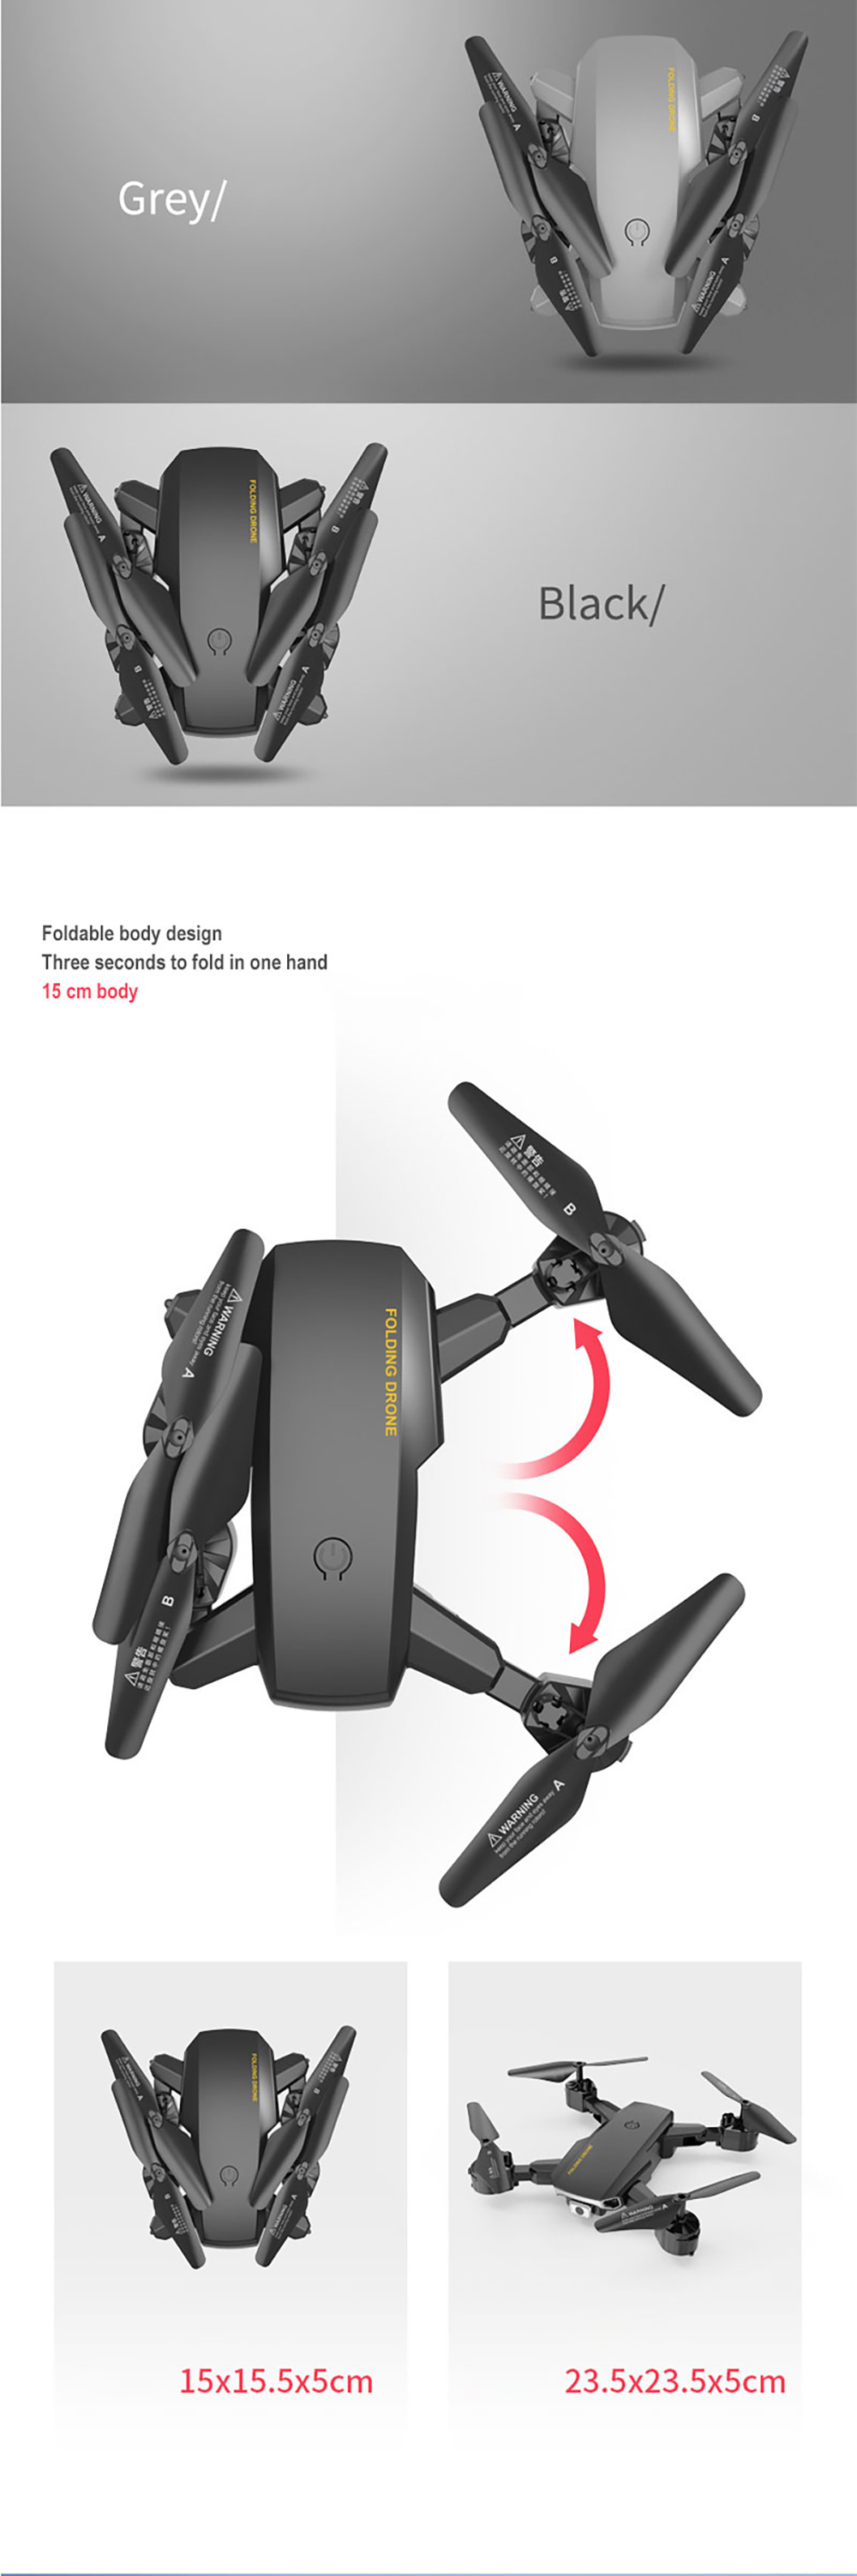 S60-Mini-Drone-WIFI-FPV-with-4K-HD-Camera-Optical-Flow-Positioning-15mins-Flight-Time-Foldable-RC-Qu-1775566-2